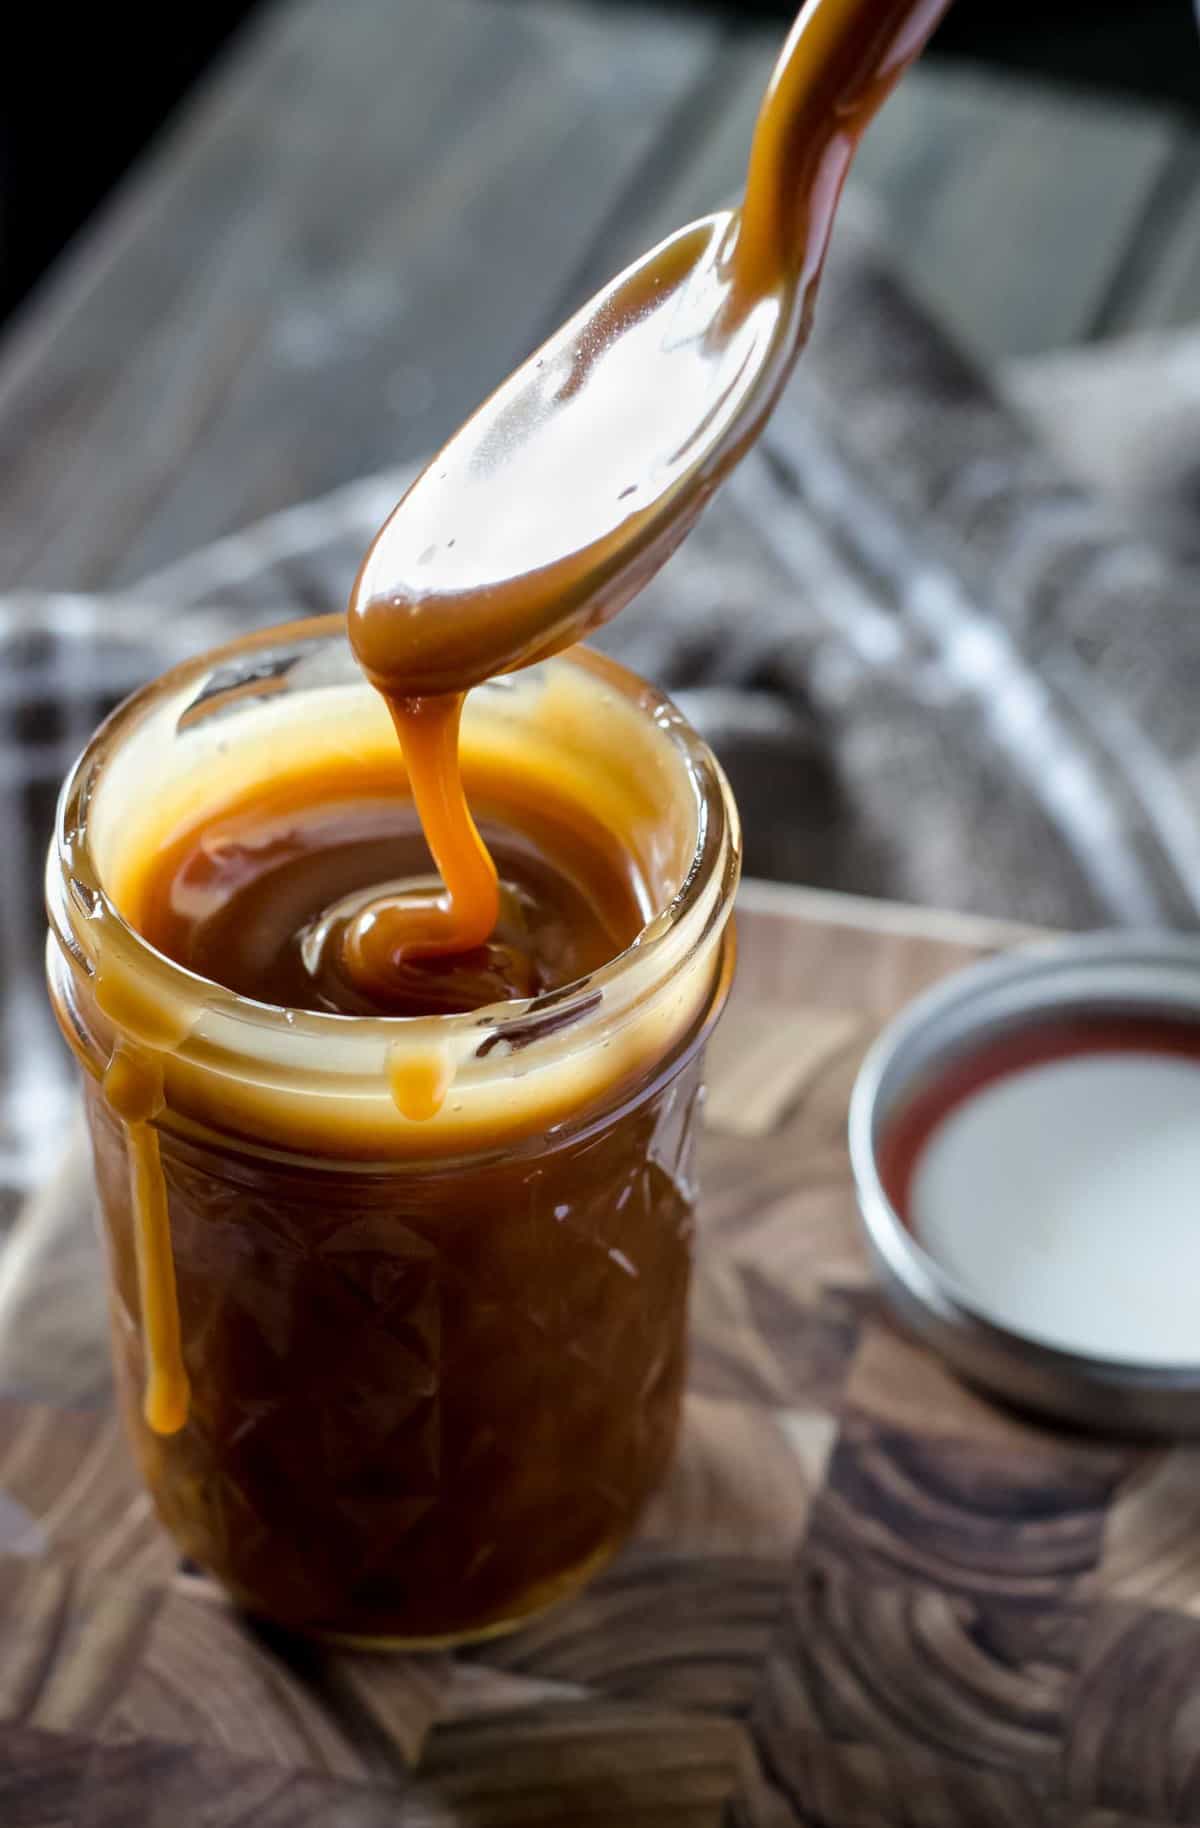 Ditch the store-bought jar! Homemade Caramel Sauce can be yours to drizzle over whatever you please in about 20 minutes with only 3 ingredients!